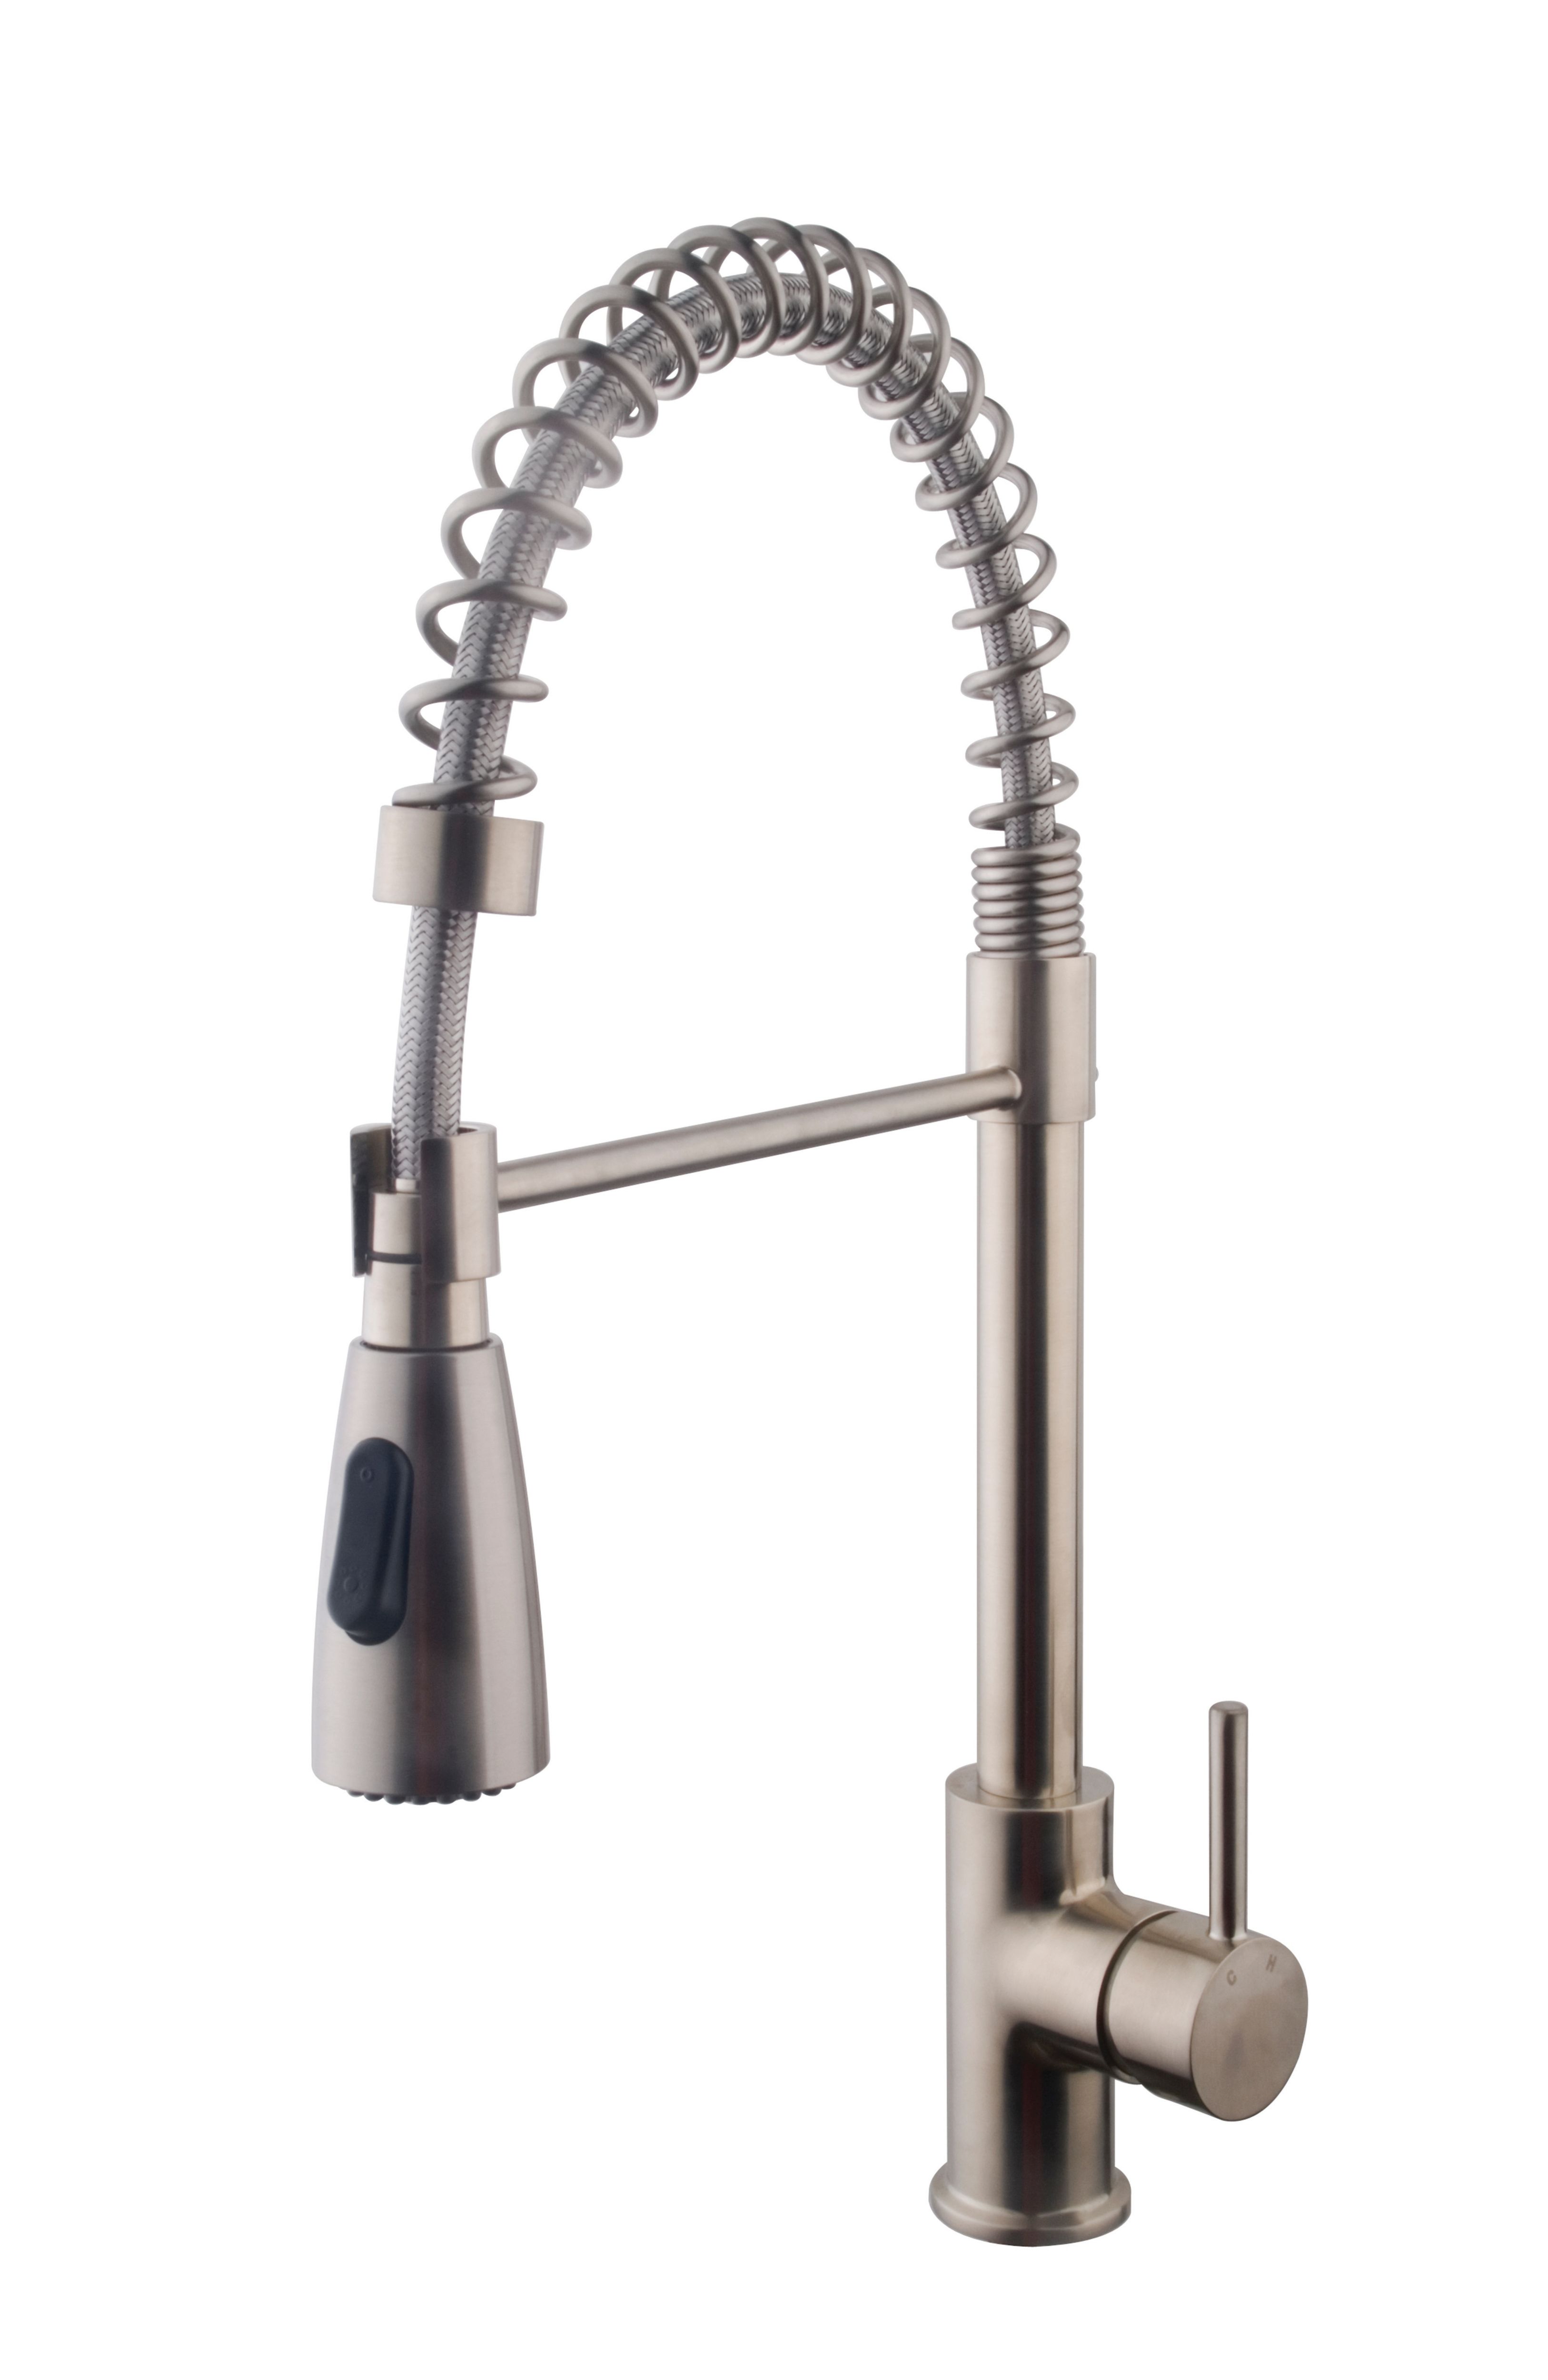 Image of Wickes Professional Monobloc Loose Coil Pull Out Kitchen Sink Mixer Tap - Brushed Nickel